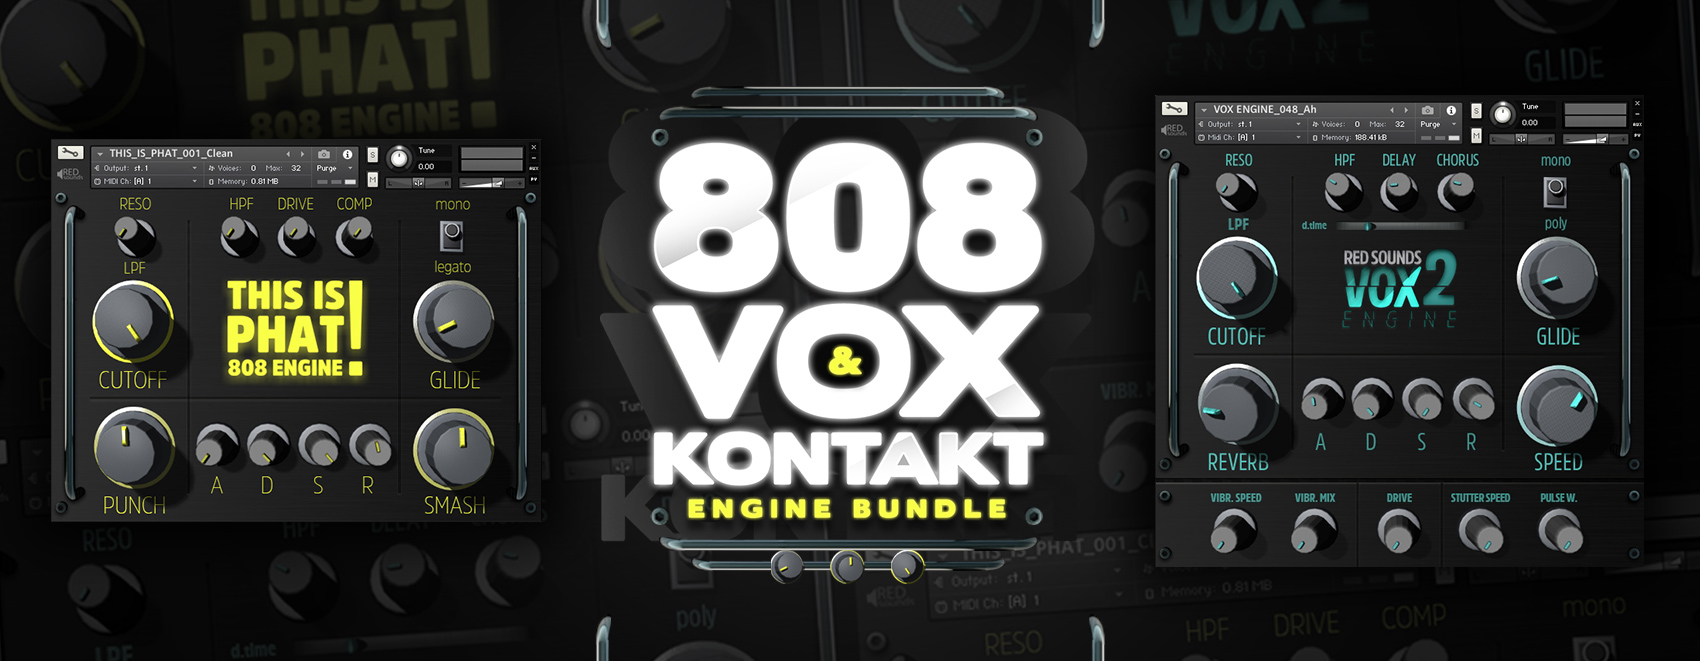 This Is Phat! 808 Engine For Kontakt Is FREE For A Limited Time